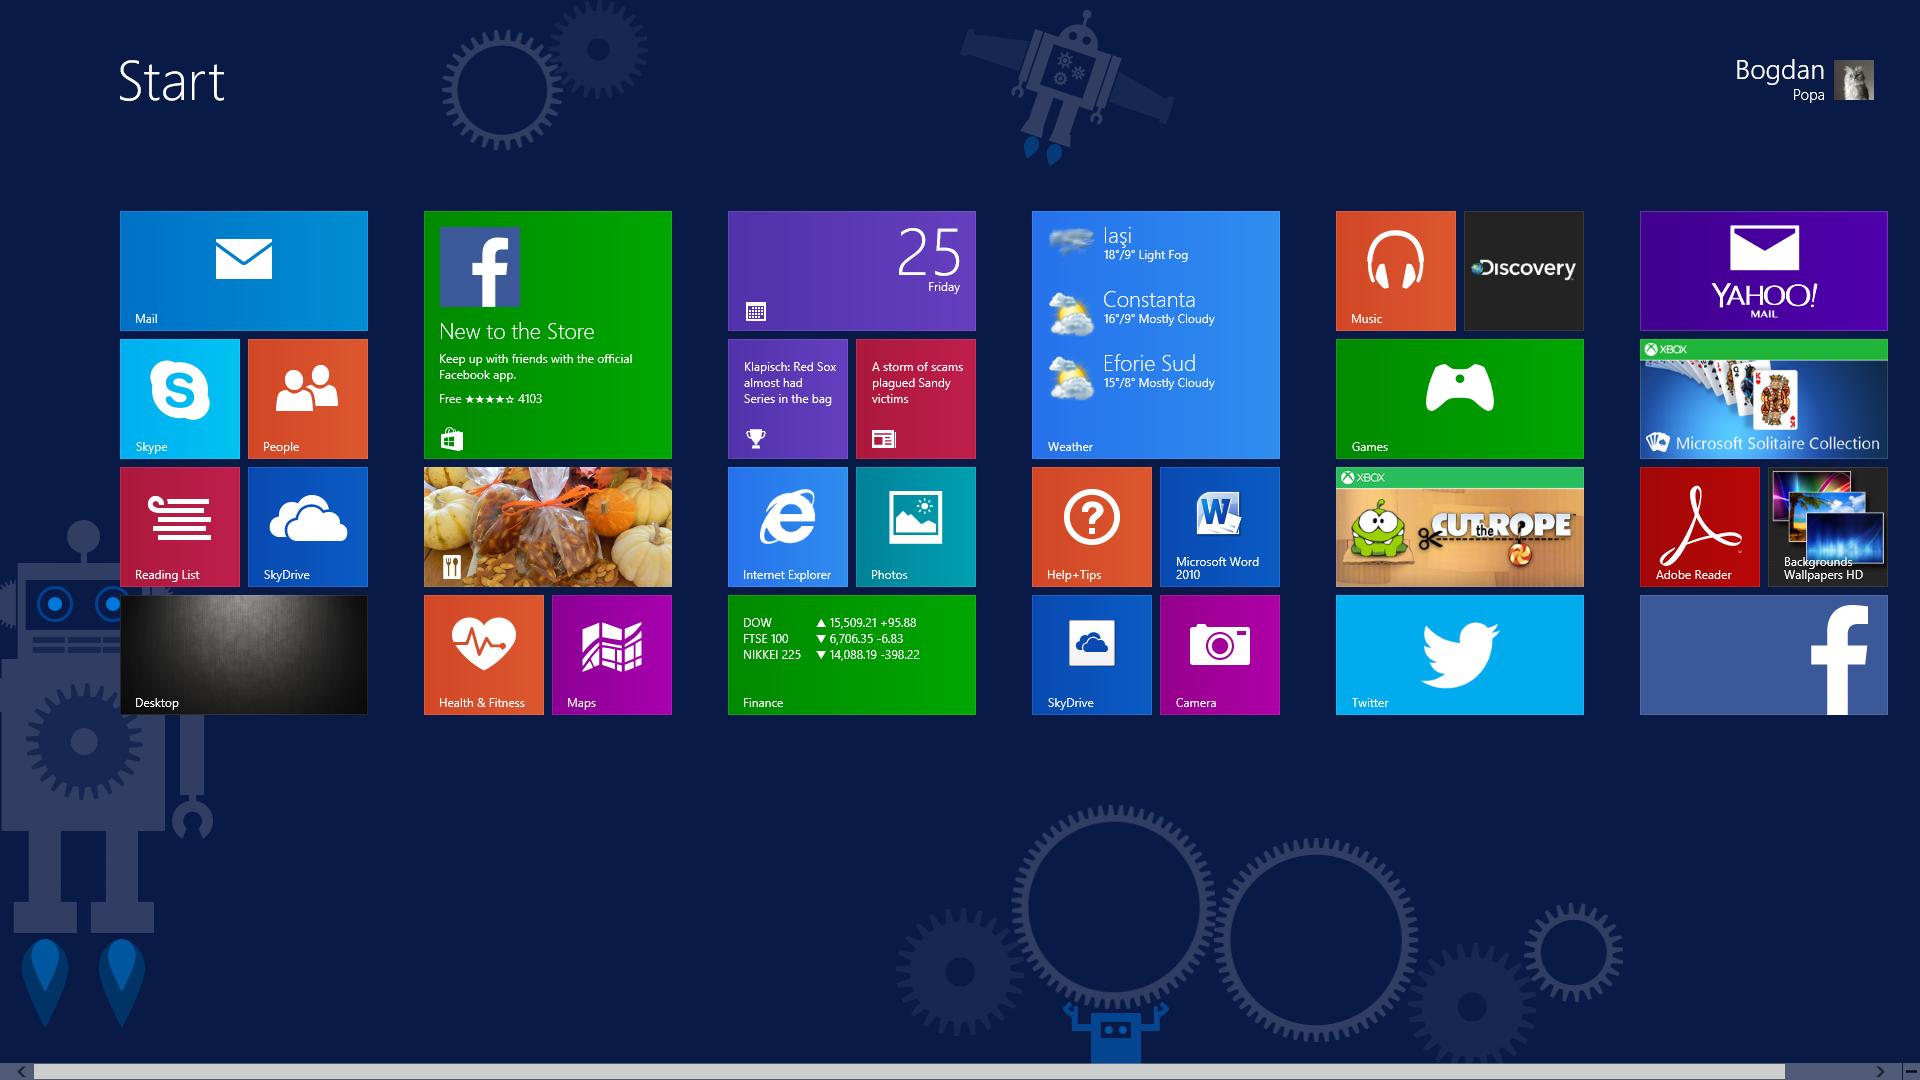 Windows 81 comes with options to use the desktop wallpaper as Start 1920x1080